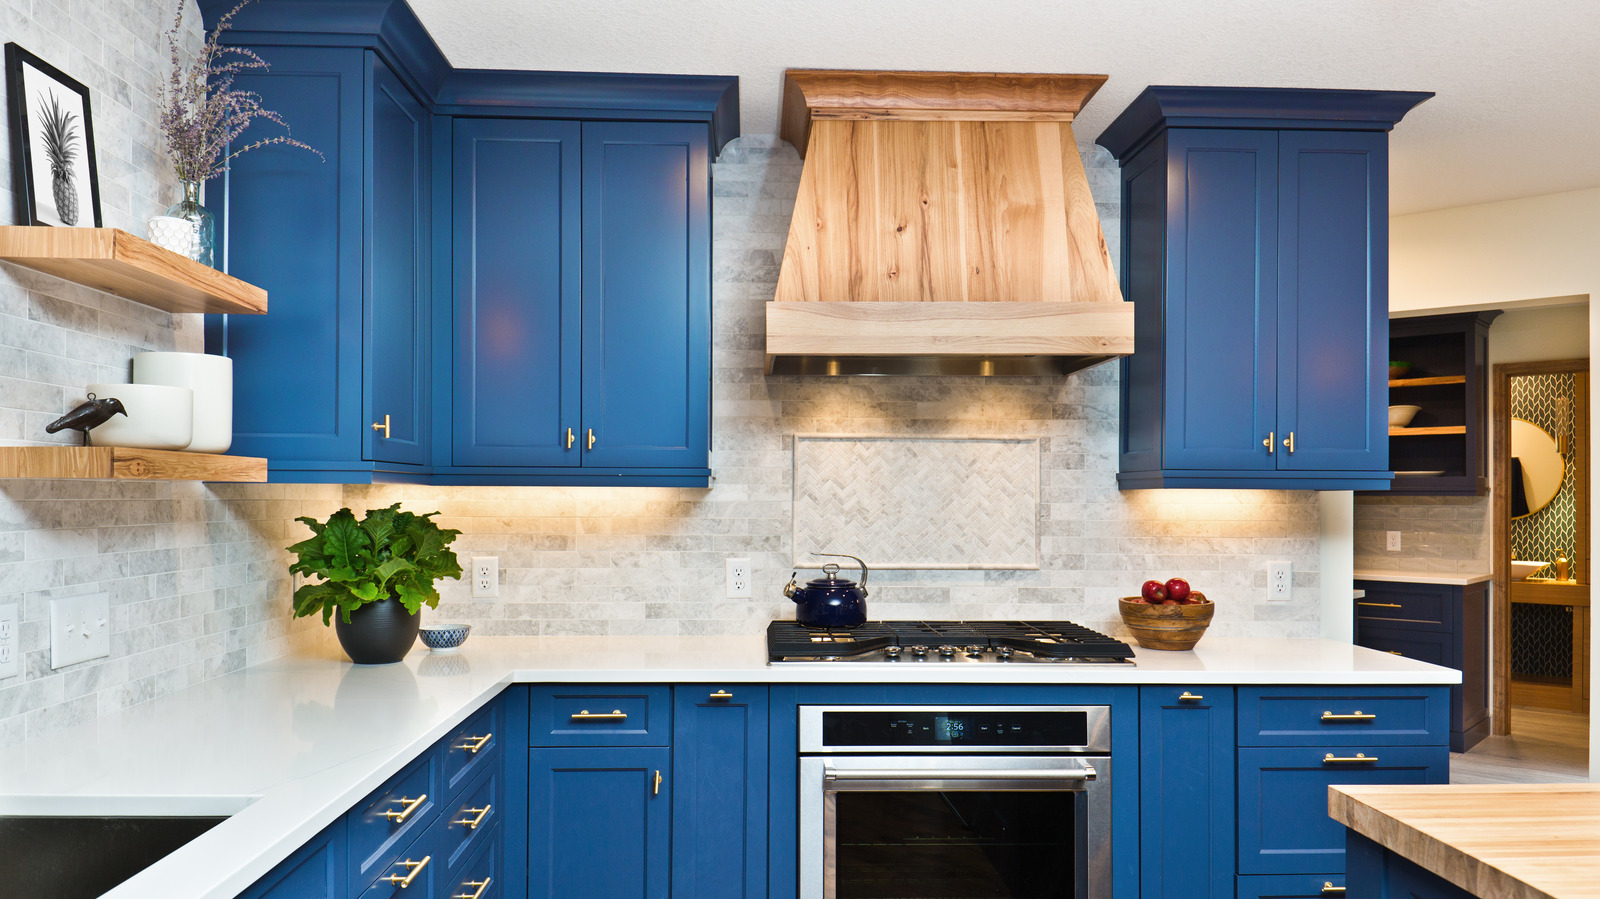 How To Extend Your Kitchen Cabinets To The Ceiling On A DIY Budget